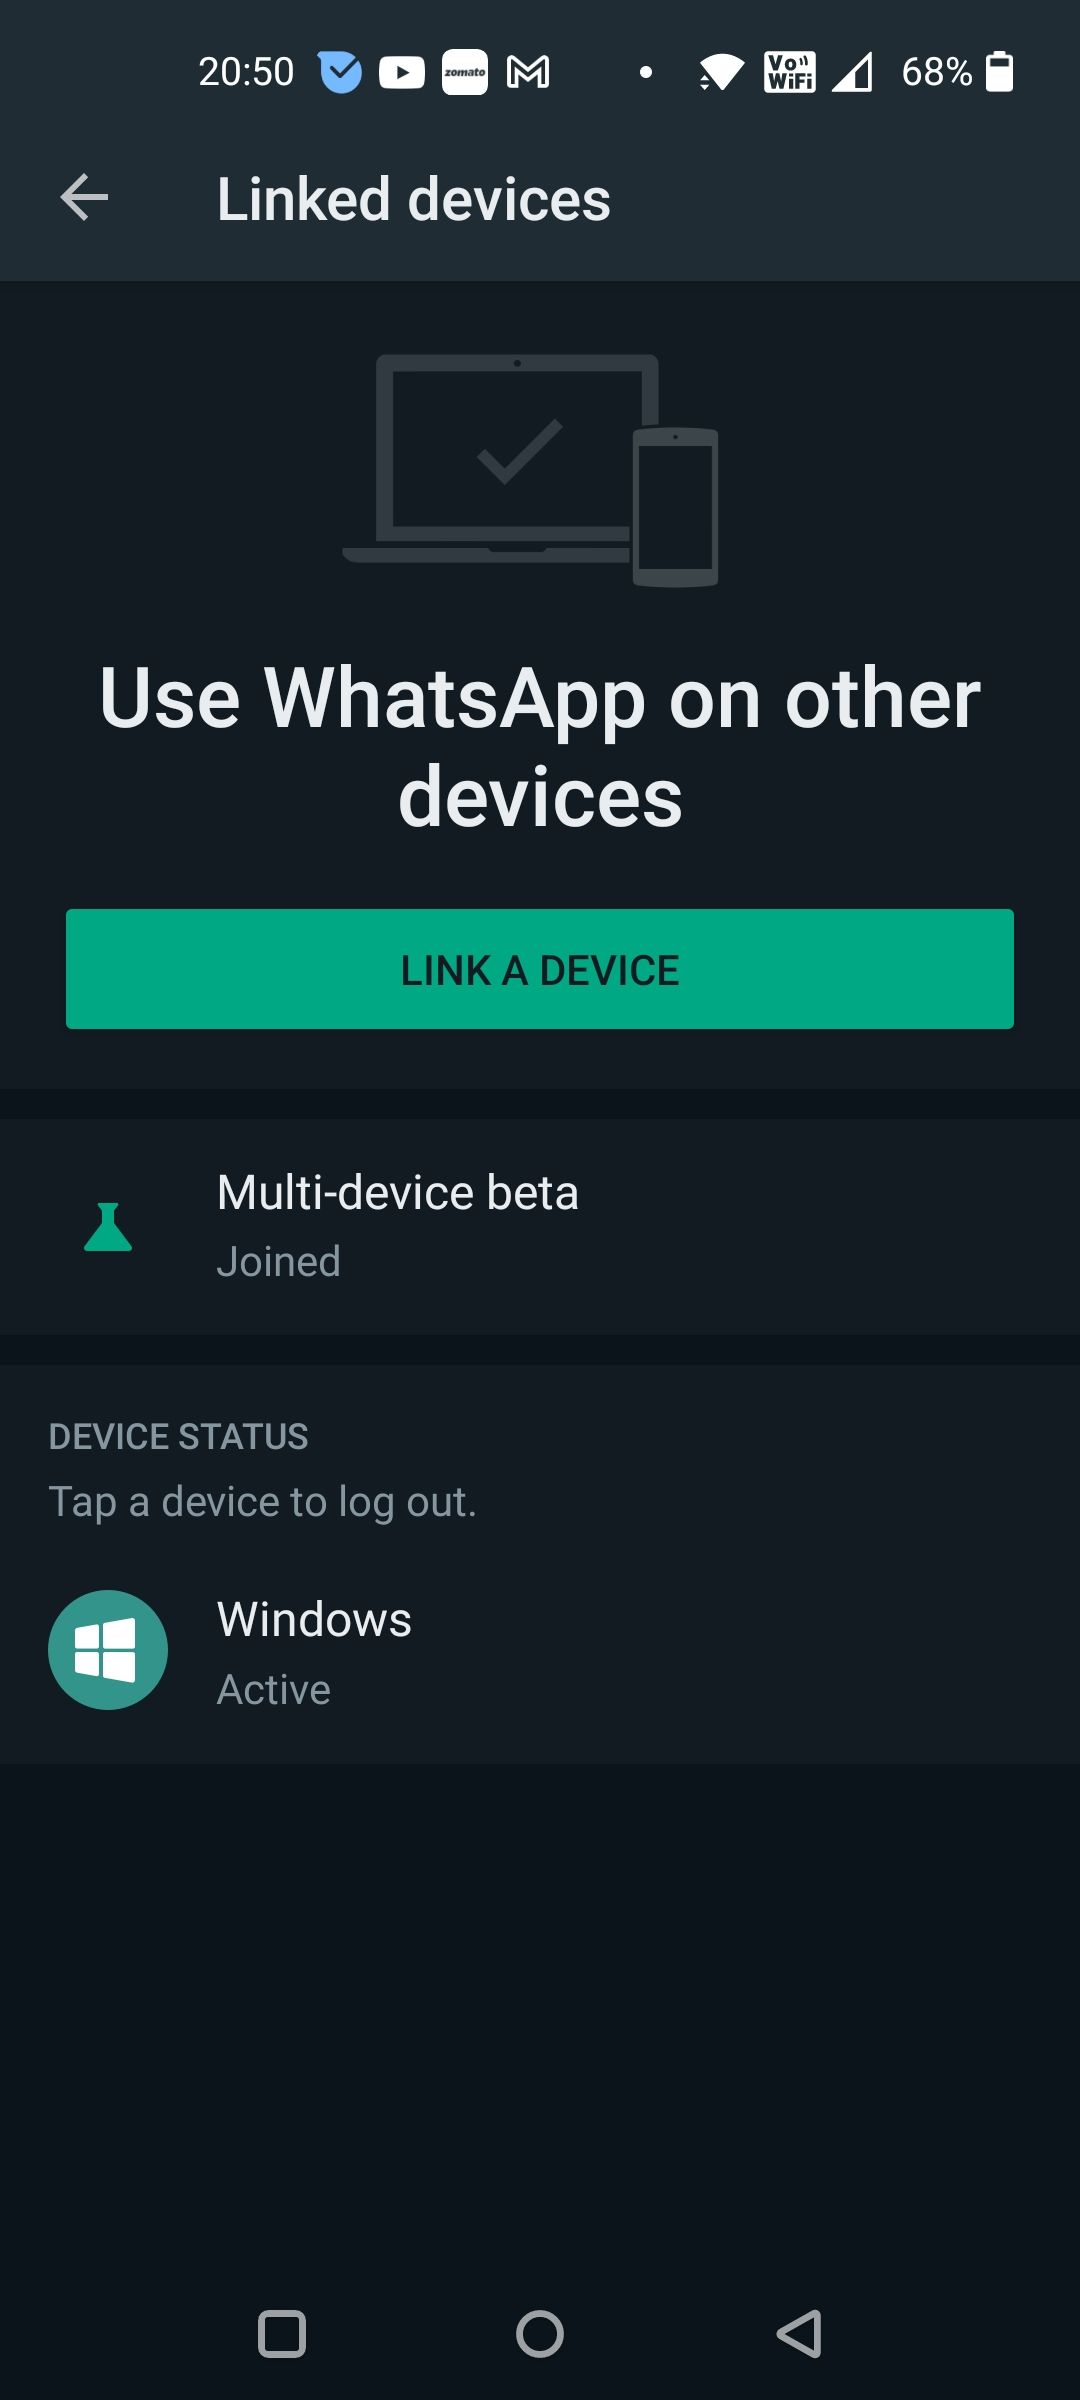 Tap On Link A Device to Scan QR WhatsApp Beta Code 